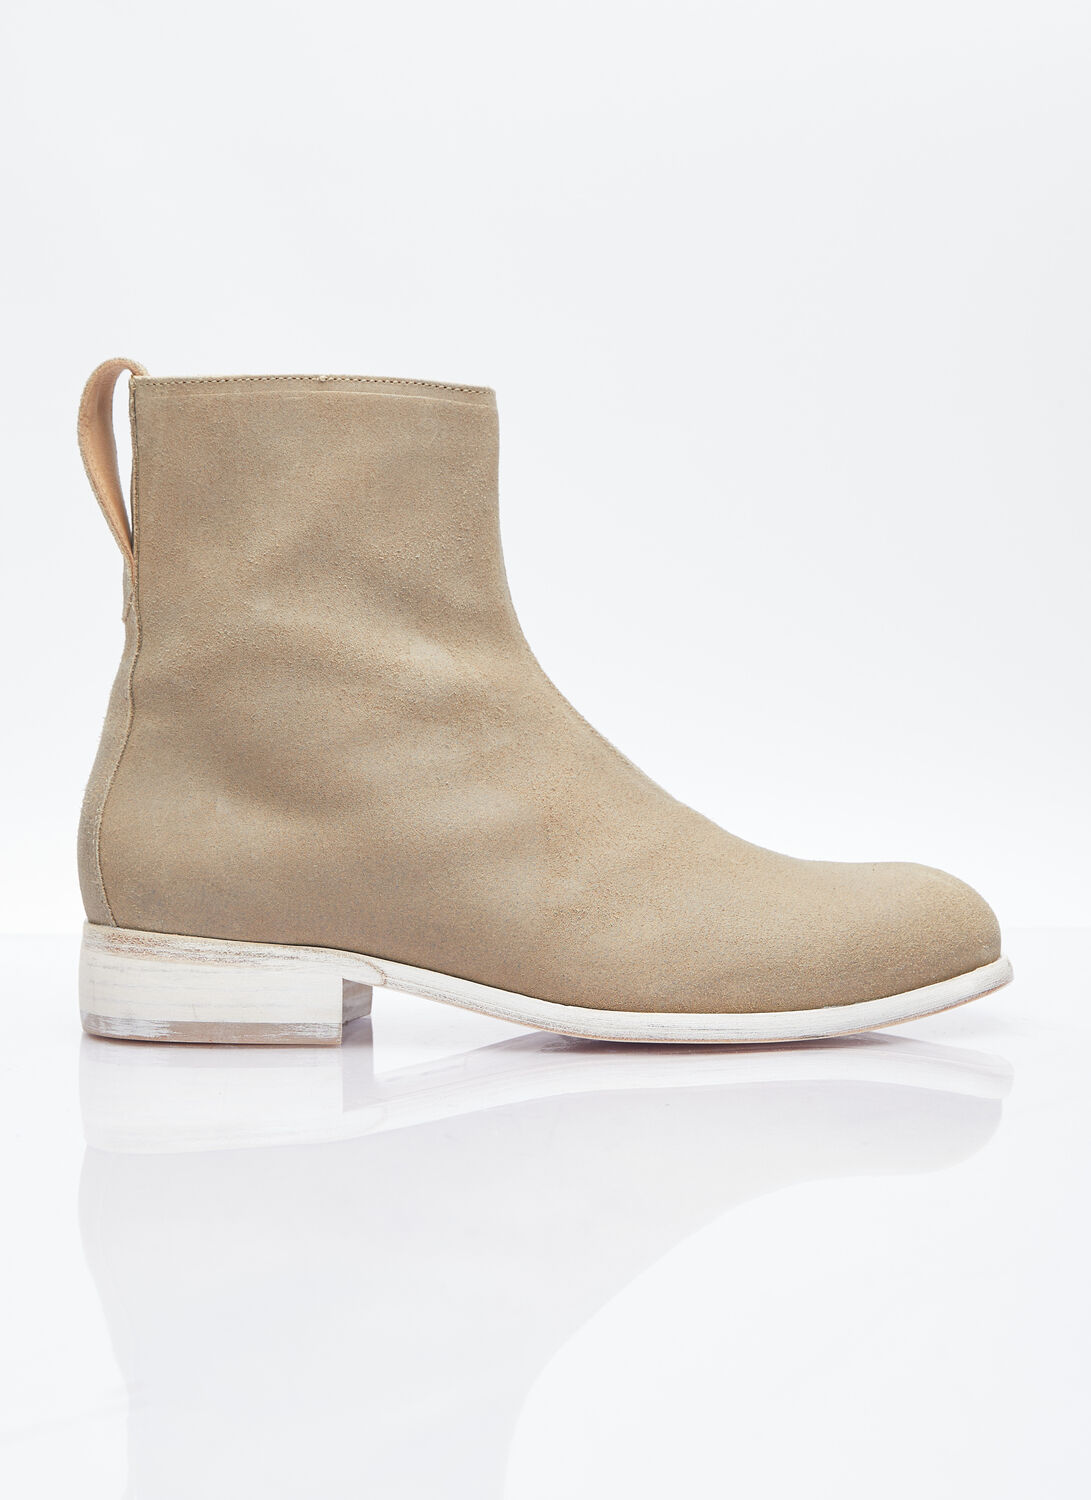 Shop Our Legacy Michaelis Suede Boots In Beige